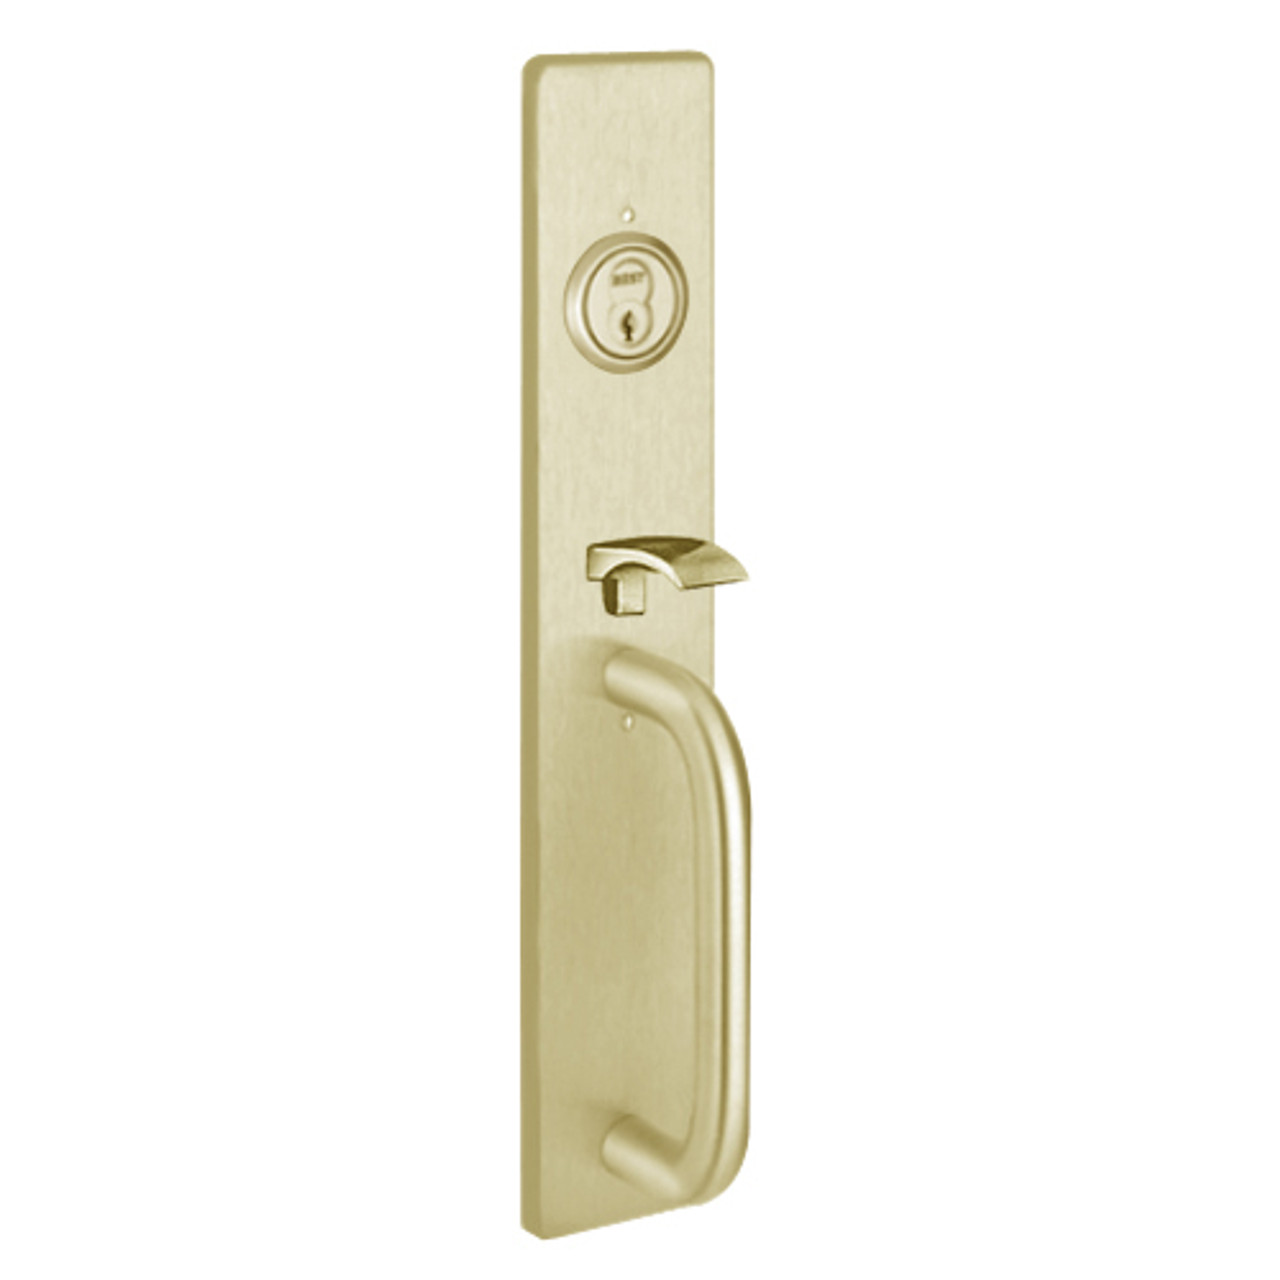 R1715C-606 PHI Thumb Piece Always Active Retrofit Trim with C Design Pull for Apex and Olympian Series Exit Device in Satin Brass Finish